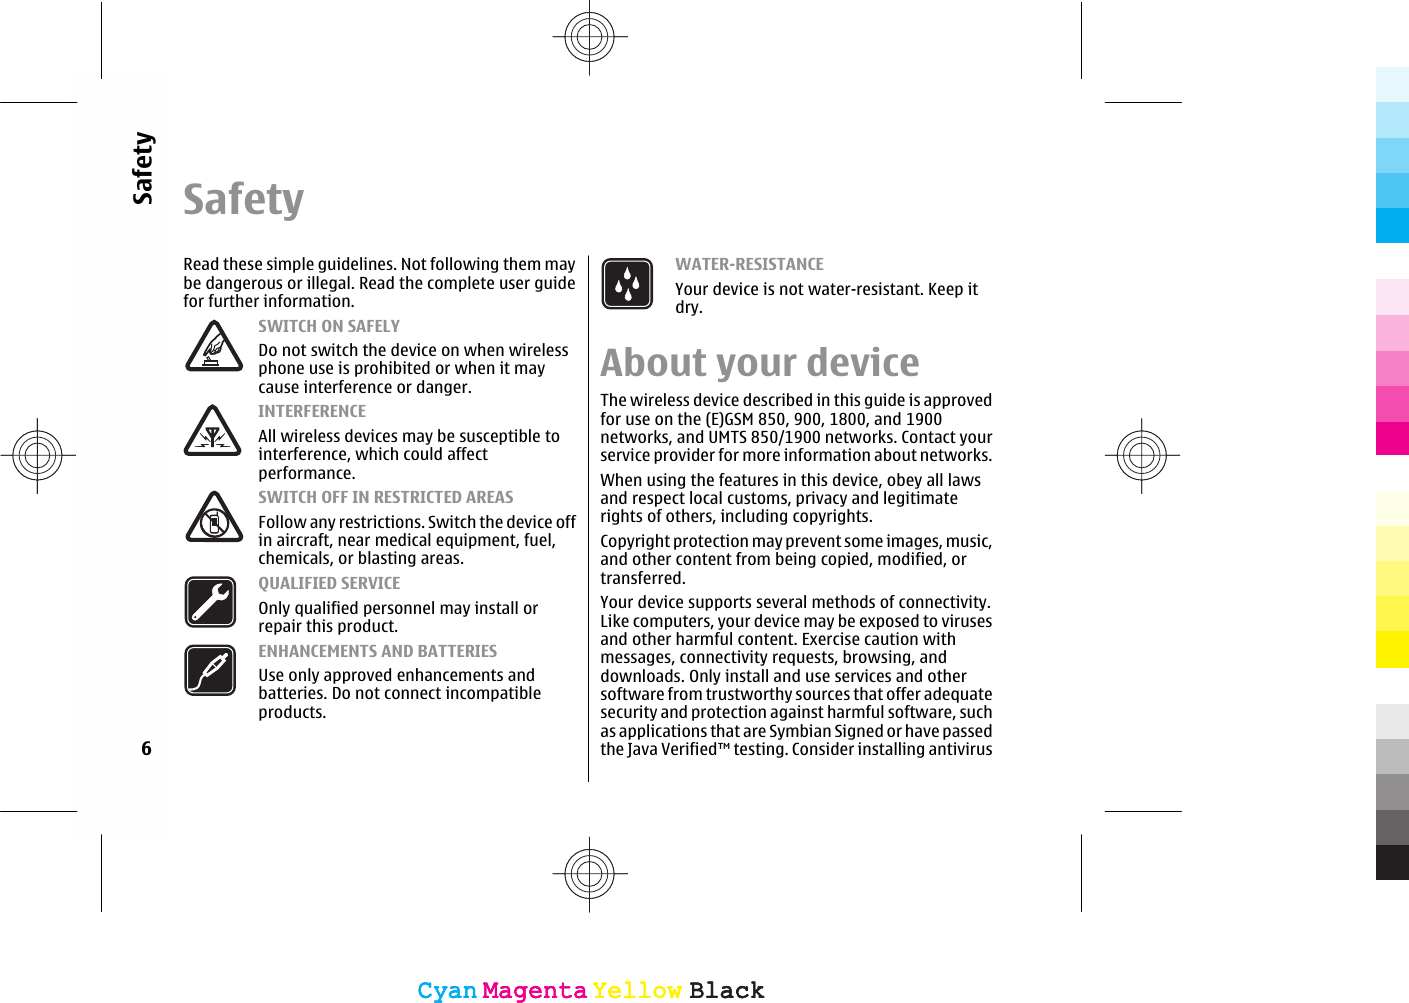 SafetyRead these simple guidelines. Not following them maybe dangerous or illegal. Read the complete user guidefor further information.SWITCH ON SAFELYDo not switch the device on when wirelessphone use is prohibited or when it maycause interference or danger.INTERFERENCEAll wireless devices may be susceptible tointerference, which could affectperformance.SWITCH OFF IN RESTRICTED AREASFollow any restrictions. Switch the device offin aircraft, near medical equipment, fuel,chemicals, or blasting areas.QUALIFIED SERVICEOnly qualified personnel may install orrepair this product.ENHANCEMENTS AND BATTERIESUse only approved enhancements andbatteries. Do not connect incompatibleproducts.WATER-RESISTANCEYour device is not water-resistant. Keep itdry.About your deviceThe wireless device described in this guide is approvedfor use on the (E)GSM 850, 900, 1800, and 1900networks, and UMTS 850/1900 networks. Contact yourservice provider for more information about networks.When using the features in this device, obey all lawsand respect local customs, privacy and legitimaterights of others, including copyrights.Copyright protection may prevent some images, music,and other content from being copied, modified, ortransferred.Your device supports several methods of connectivity.Like computers, your device may be exposed to virusesand other harmful content. Exercise caution withmessages, connectivity requests, browsing, anddownloads. Only install and use services and othersoftware from trustworthy sources that offer adequatesecurity and protection against harmful software, suchas applications that are Symbian Signed or have passedthe Java Verified™ testing. Consider installing antivirus6SafetyCyanCyanMagentaMagentaYellowYellowBlackBlackCyanCyanMagentaMagentaYellowYellowBlackBlack